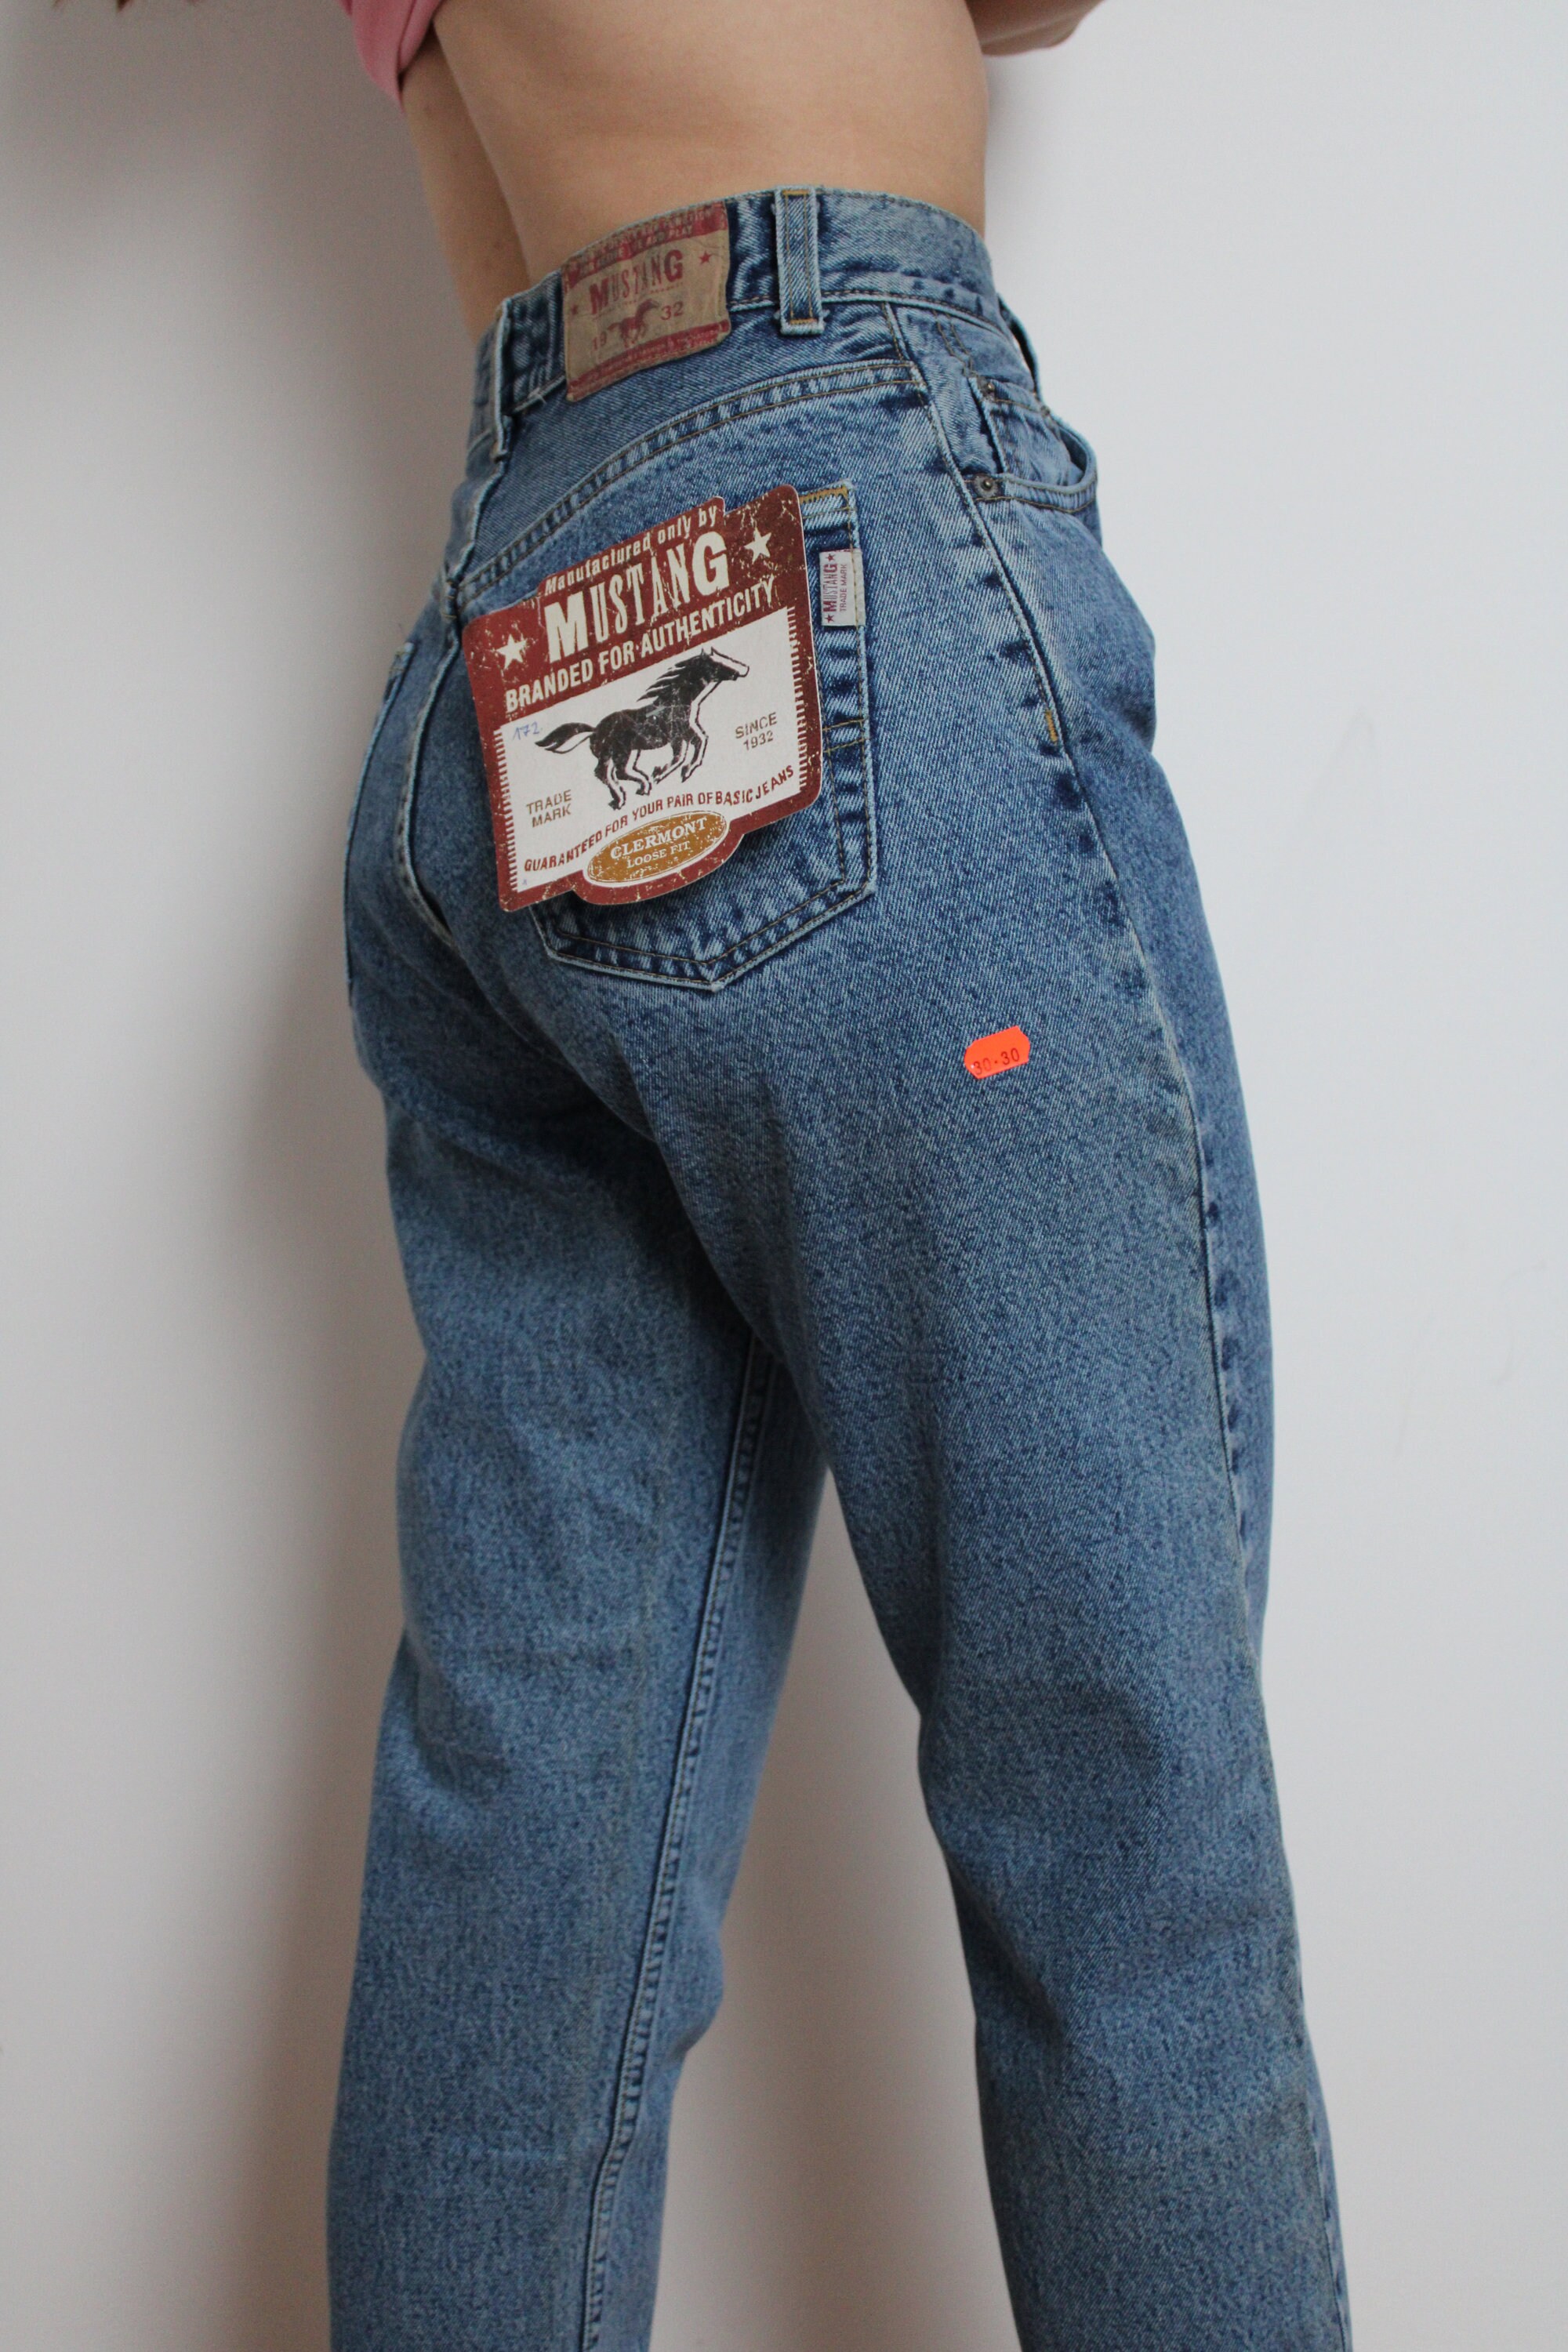 Vintage Mom Jeans / Size 28-29 / Women Mom Jeans / Stonewash Mom Jeans  Brand New With Tags - Etsy